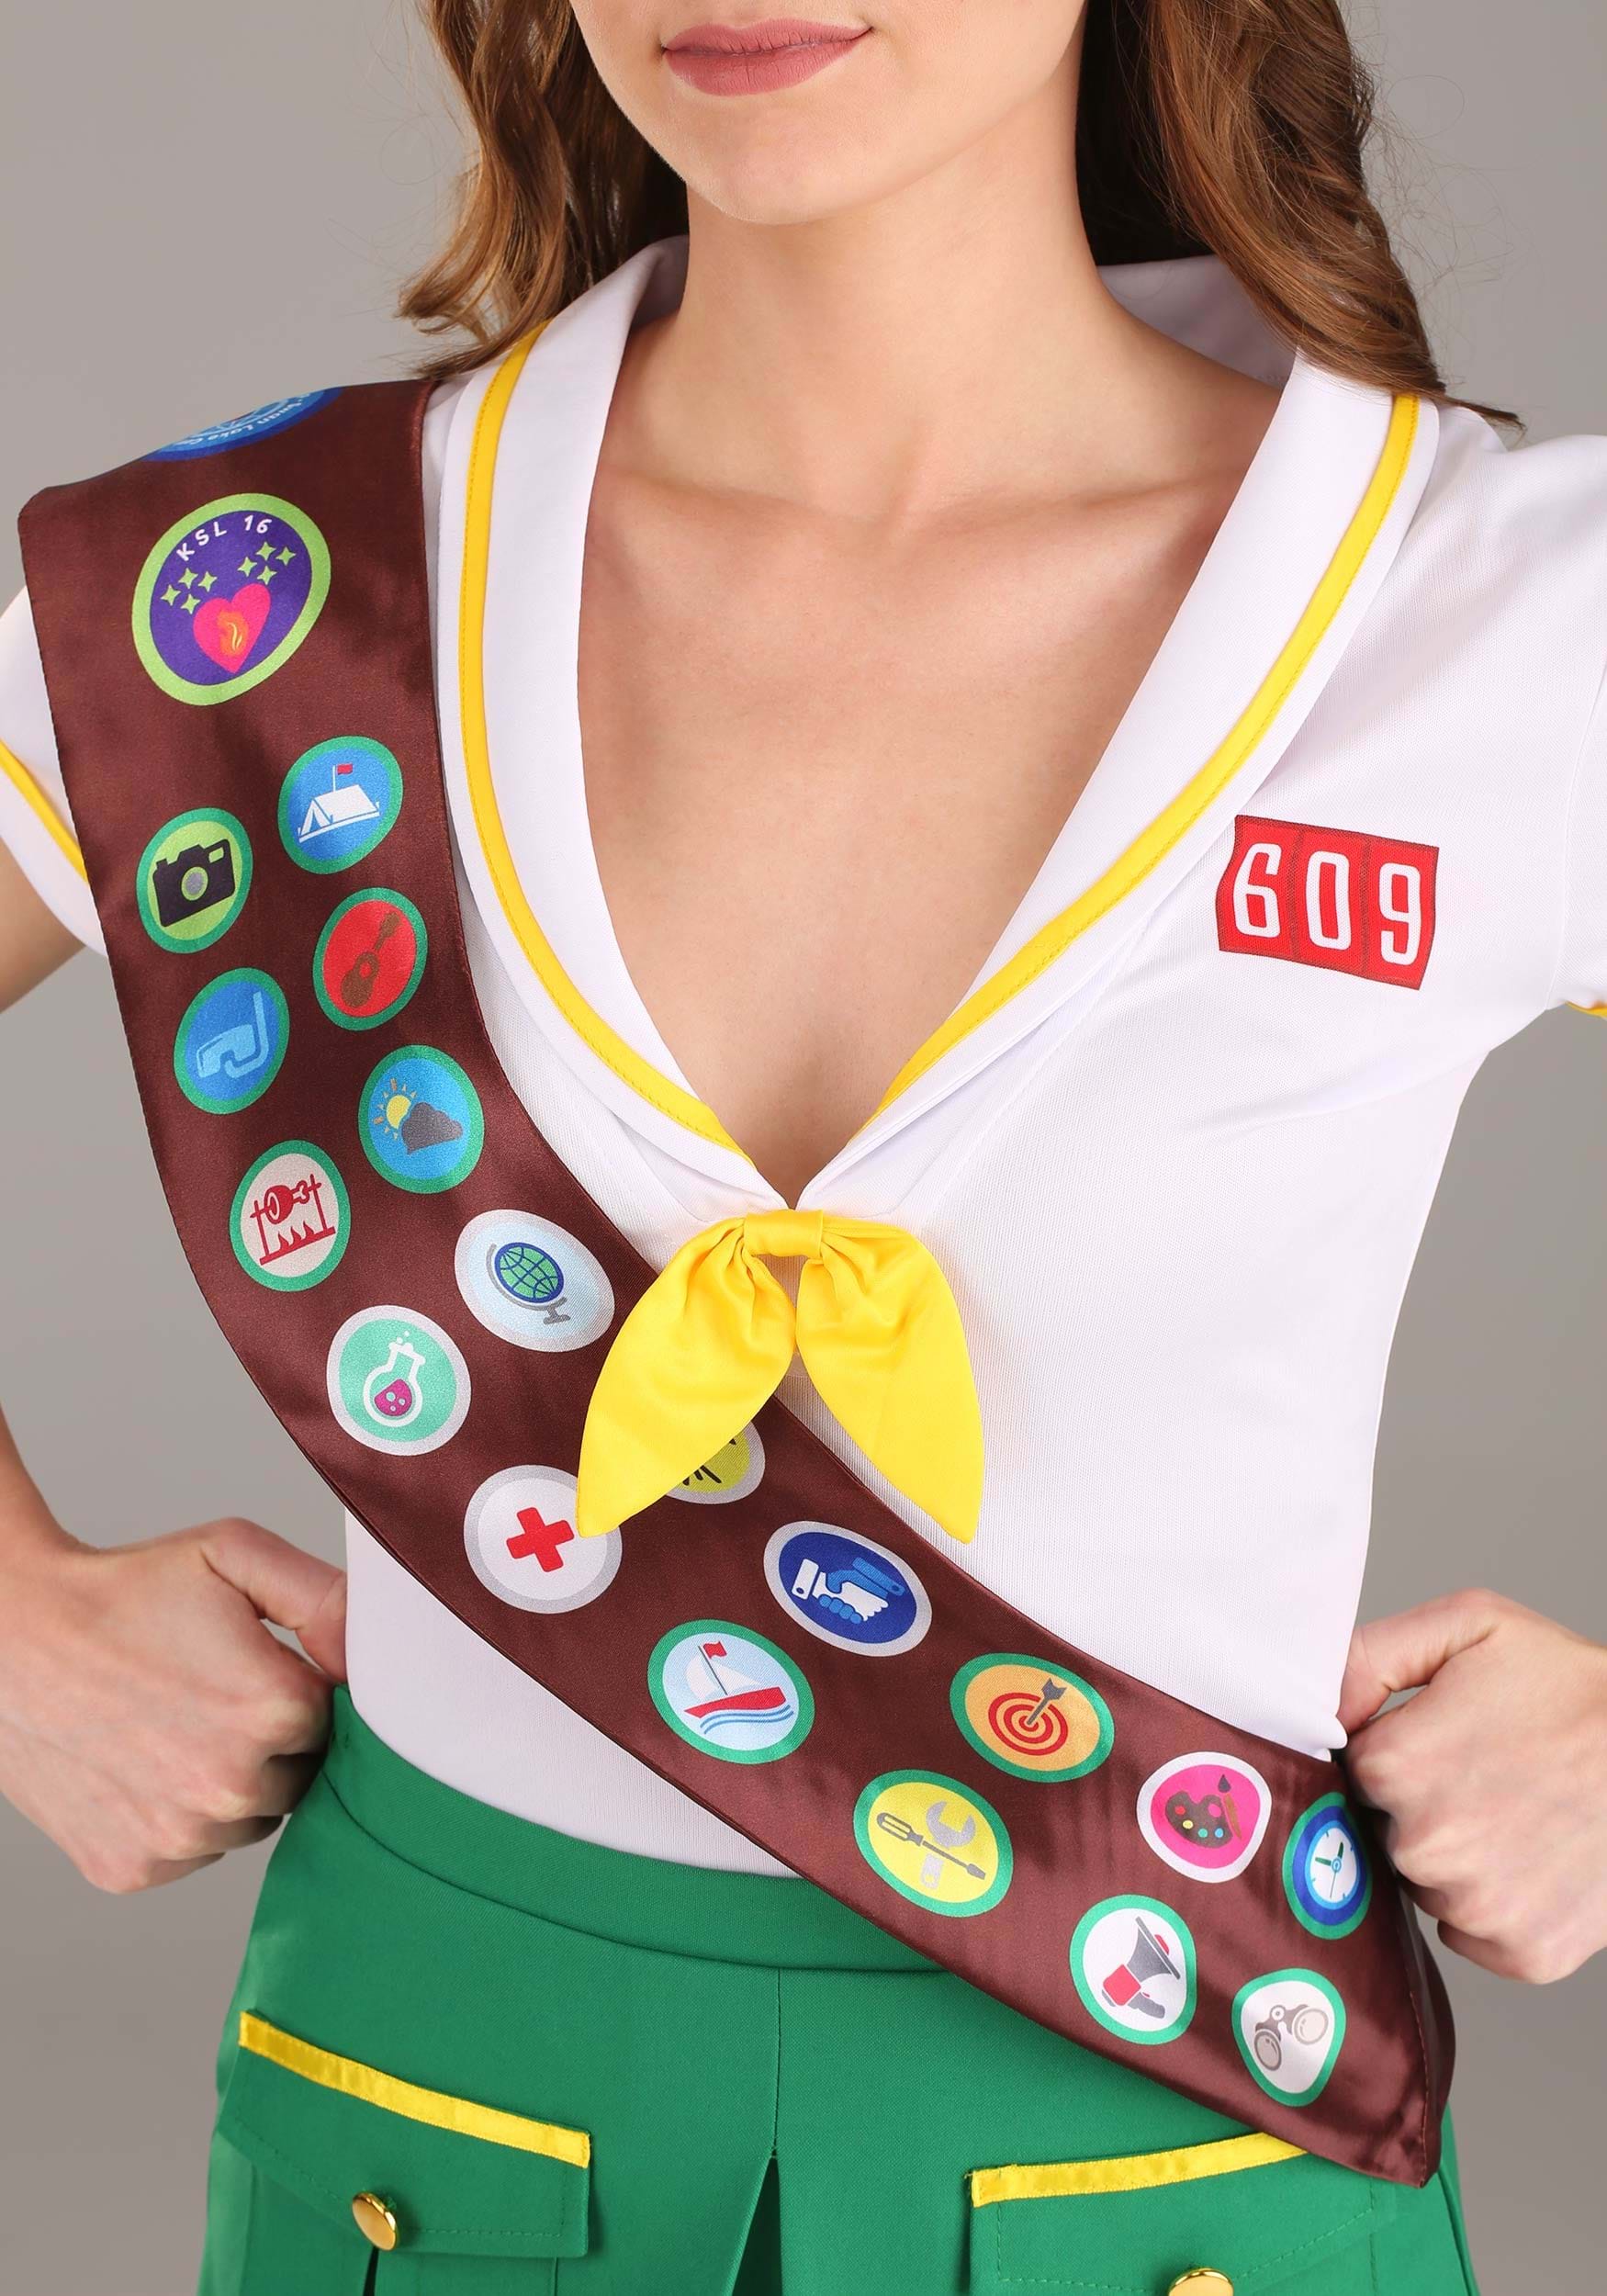 https://images.halloweencostumes.com/products/52253/2-1-211051/womens-savvy-scout-costume-alt-3.jpg